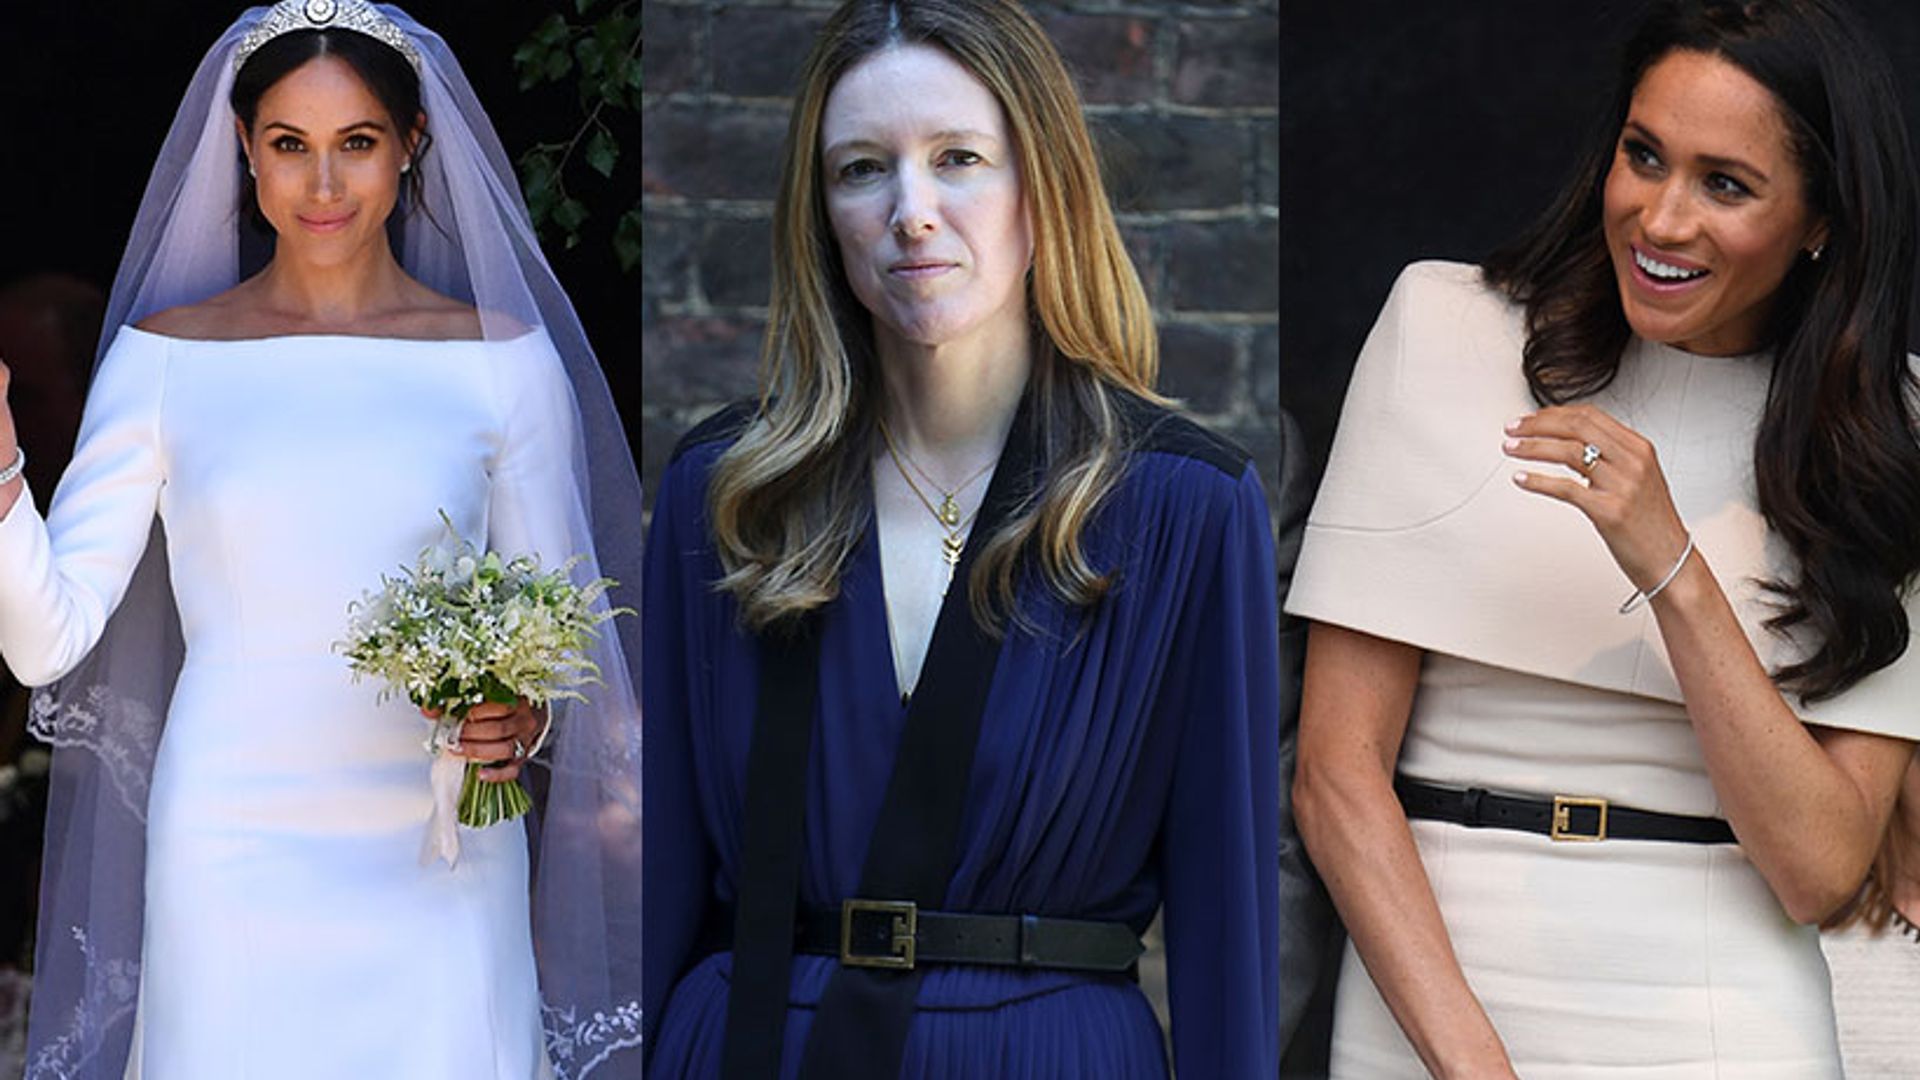 It’s official: Givenchy’s Clare Waight-Keller is Meghan’s go-to royal tailor (just like Sarah Burton is for Kate!)